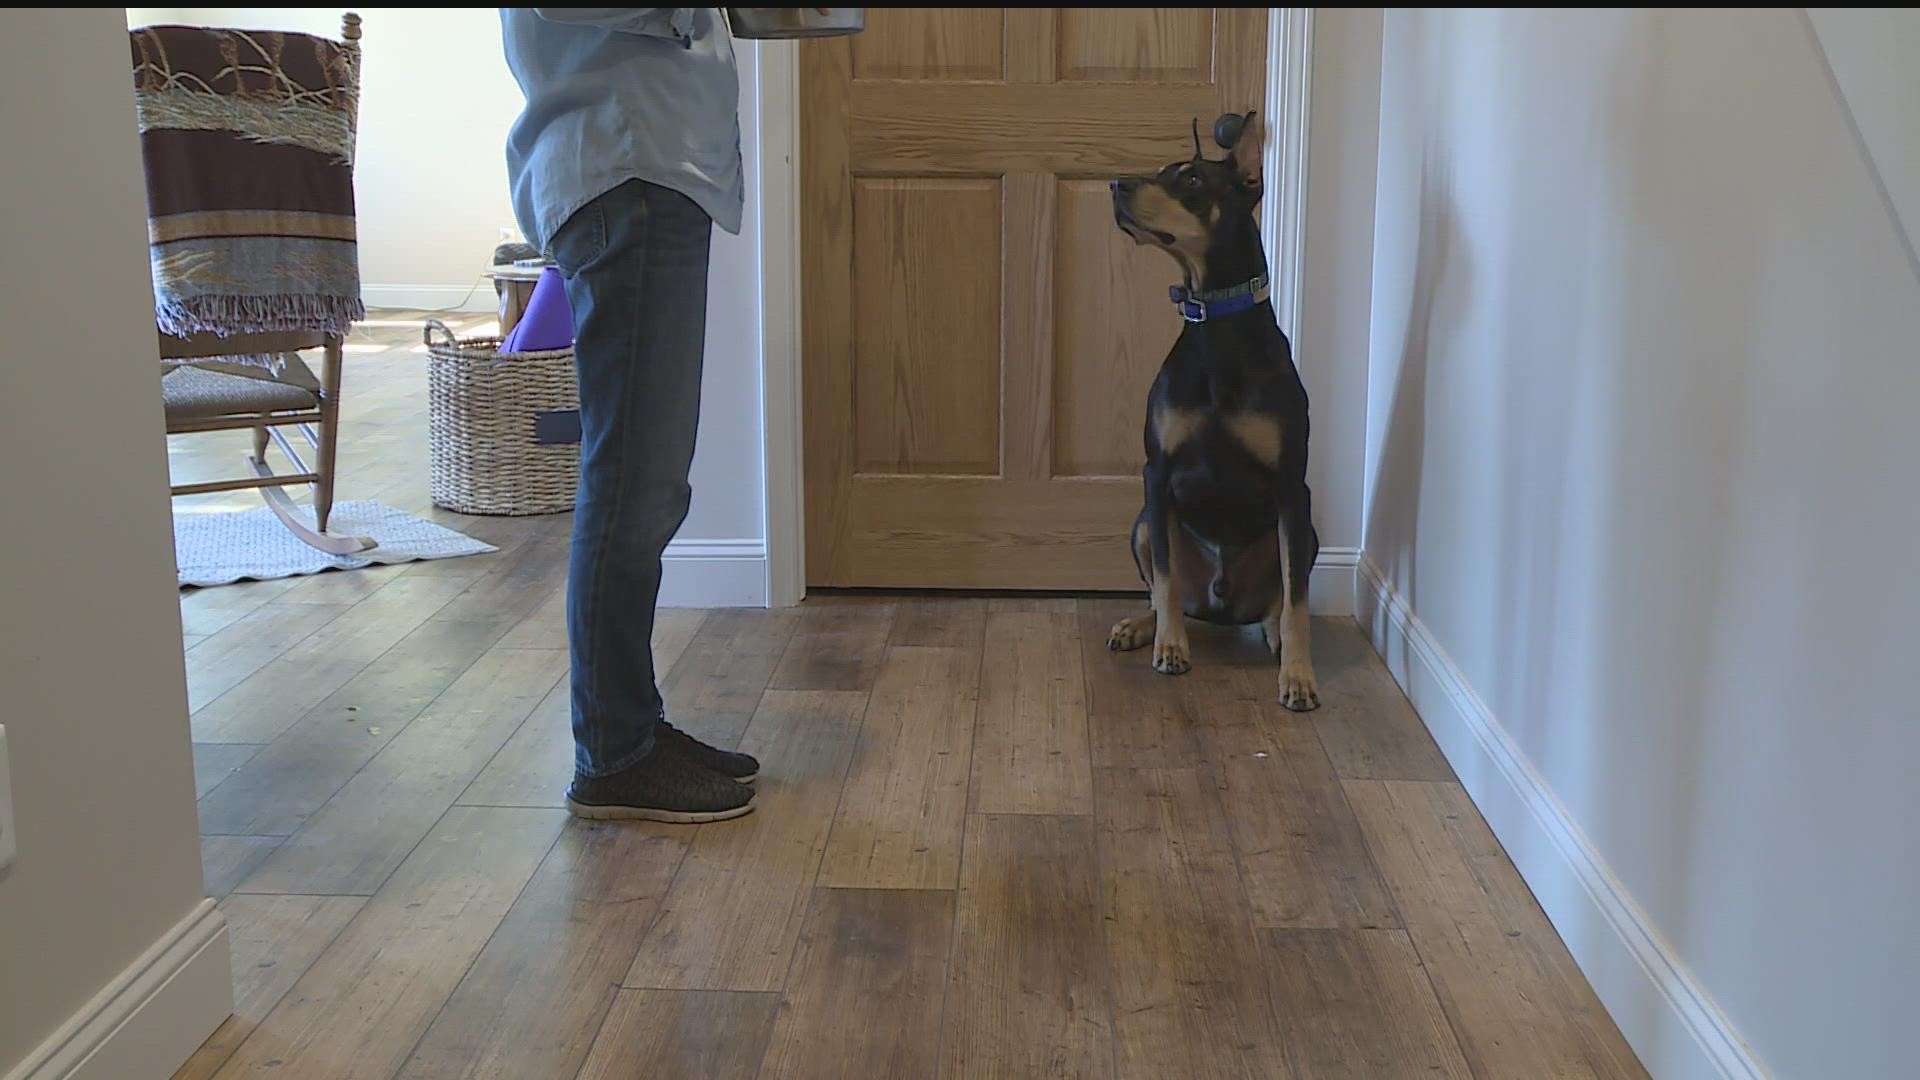 We're talking about bringing adult dogs into your home, and steps to take for a smooth transition, especially if you already have a dog.